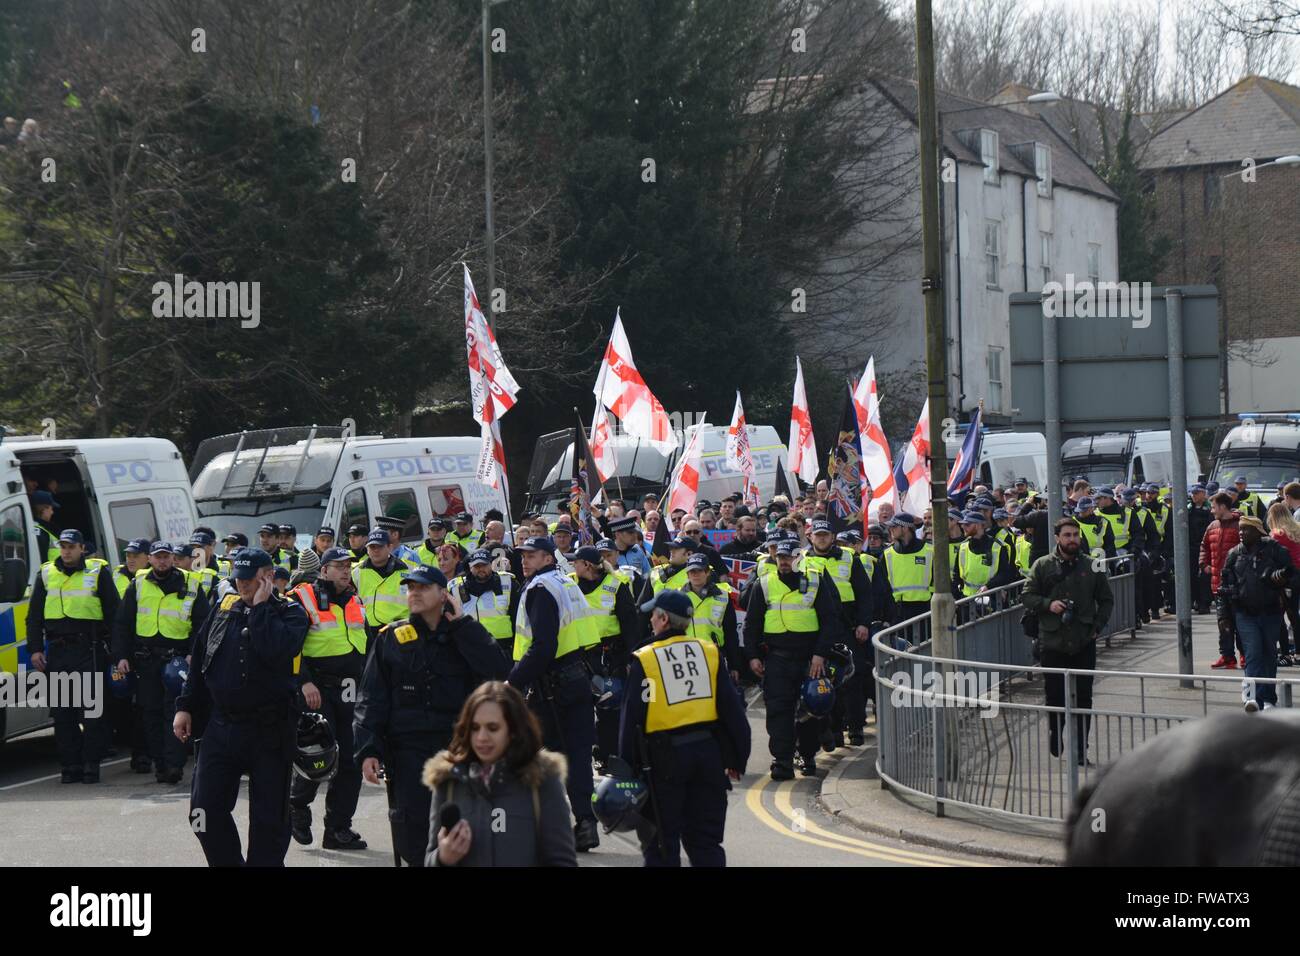 Dover, UK. 2nd April 2016. Clashes As Pro and Anti-refugee groups clash in Dover.  March starts as they're escorted by the Police. Credit: Marc Ward/Alamy Live News Stock Photo